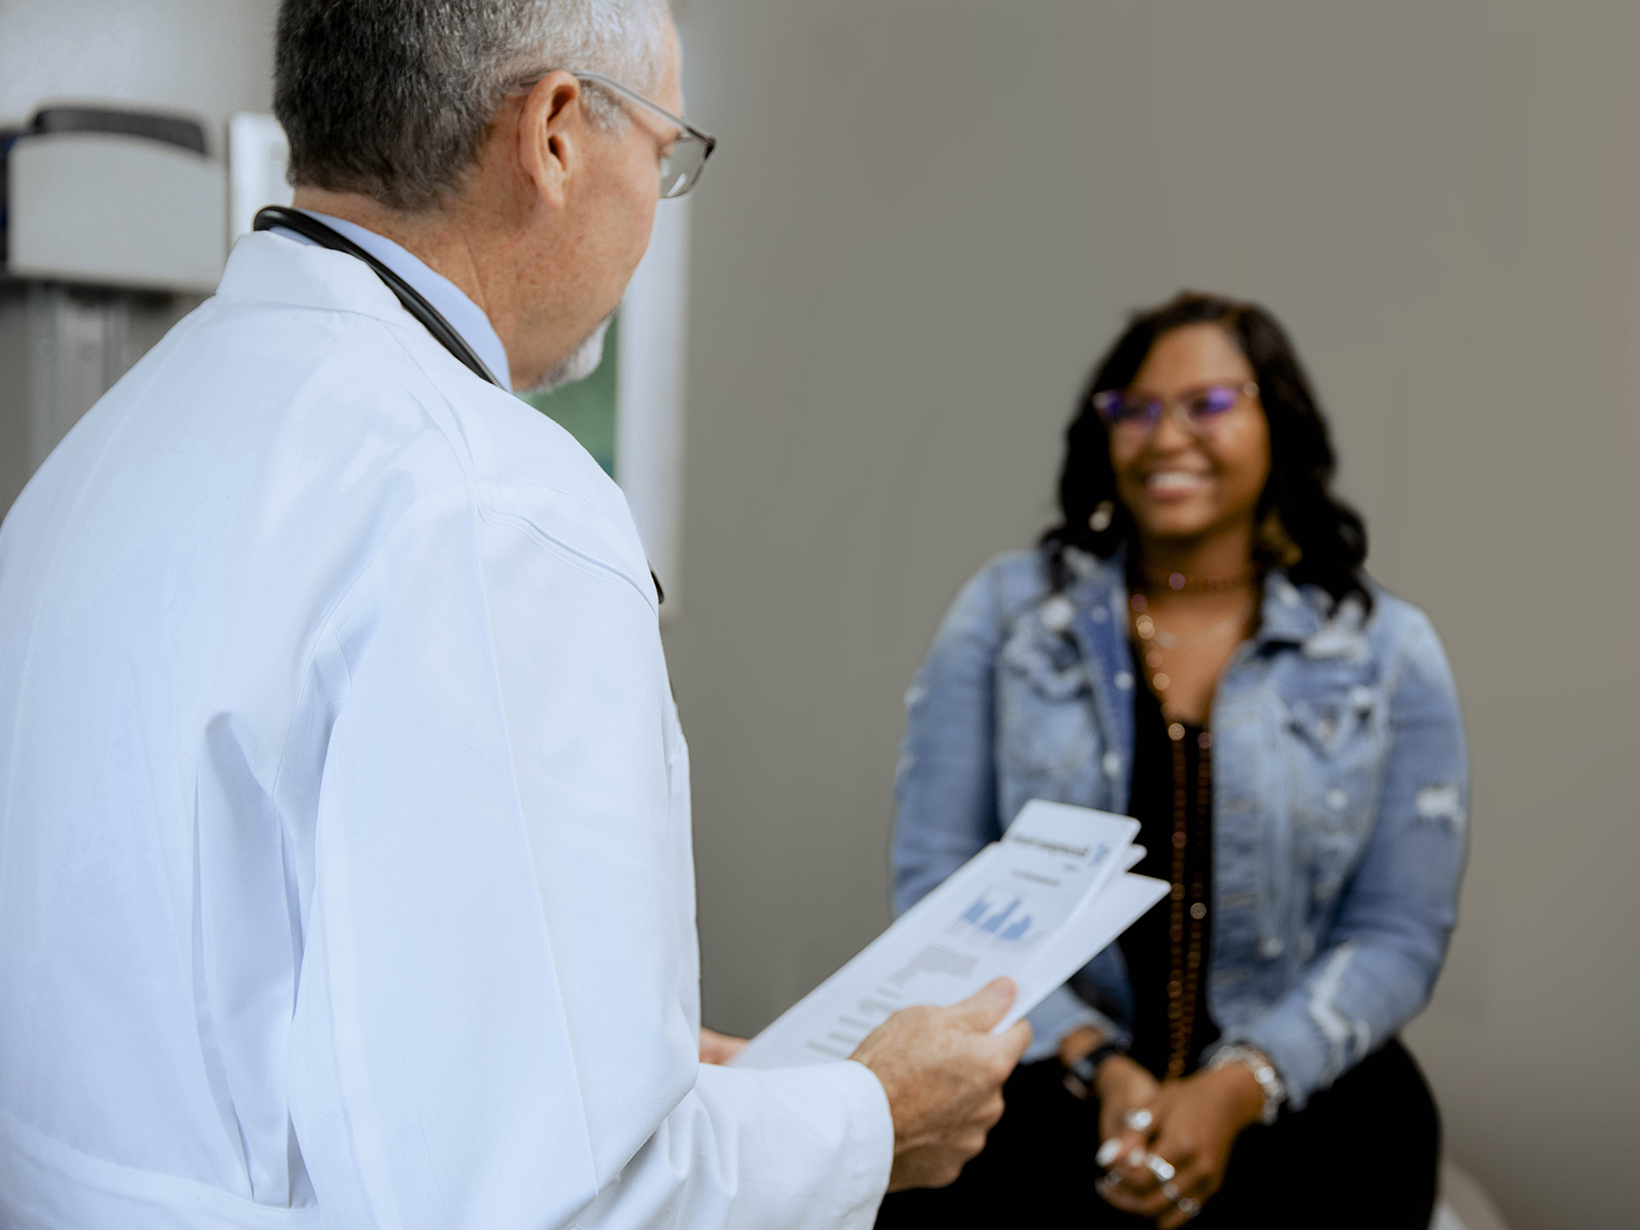 Texas Tech physician in a consultation with a smiling female patient.